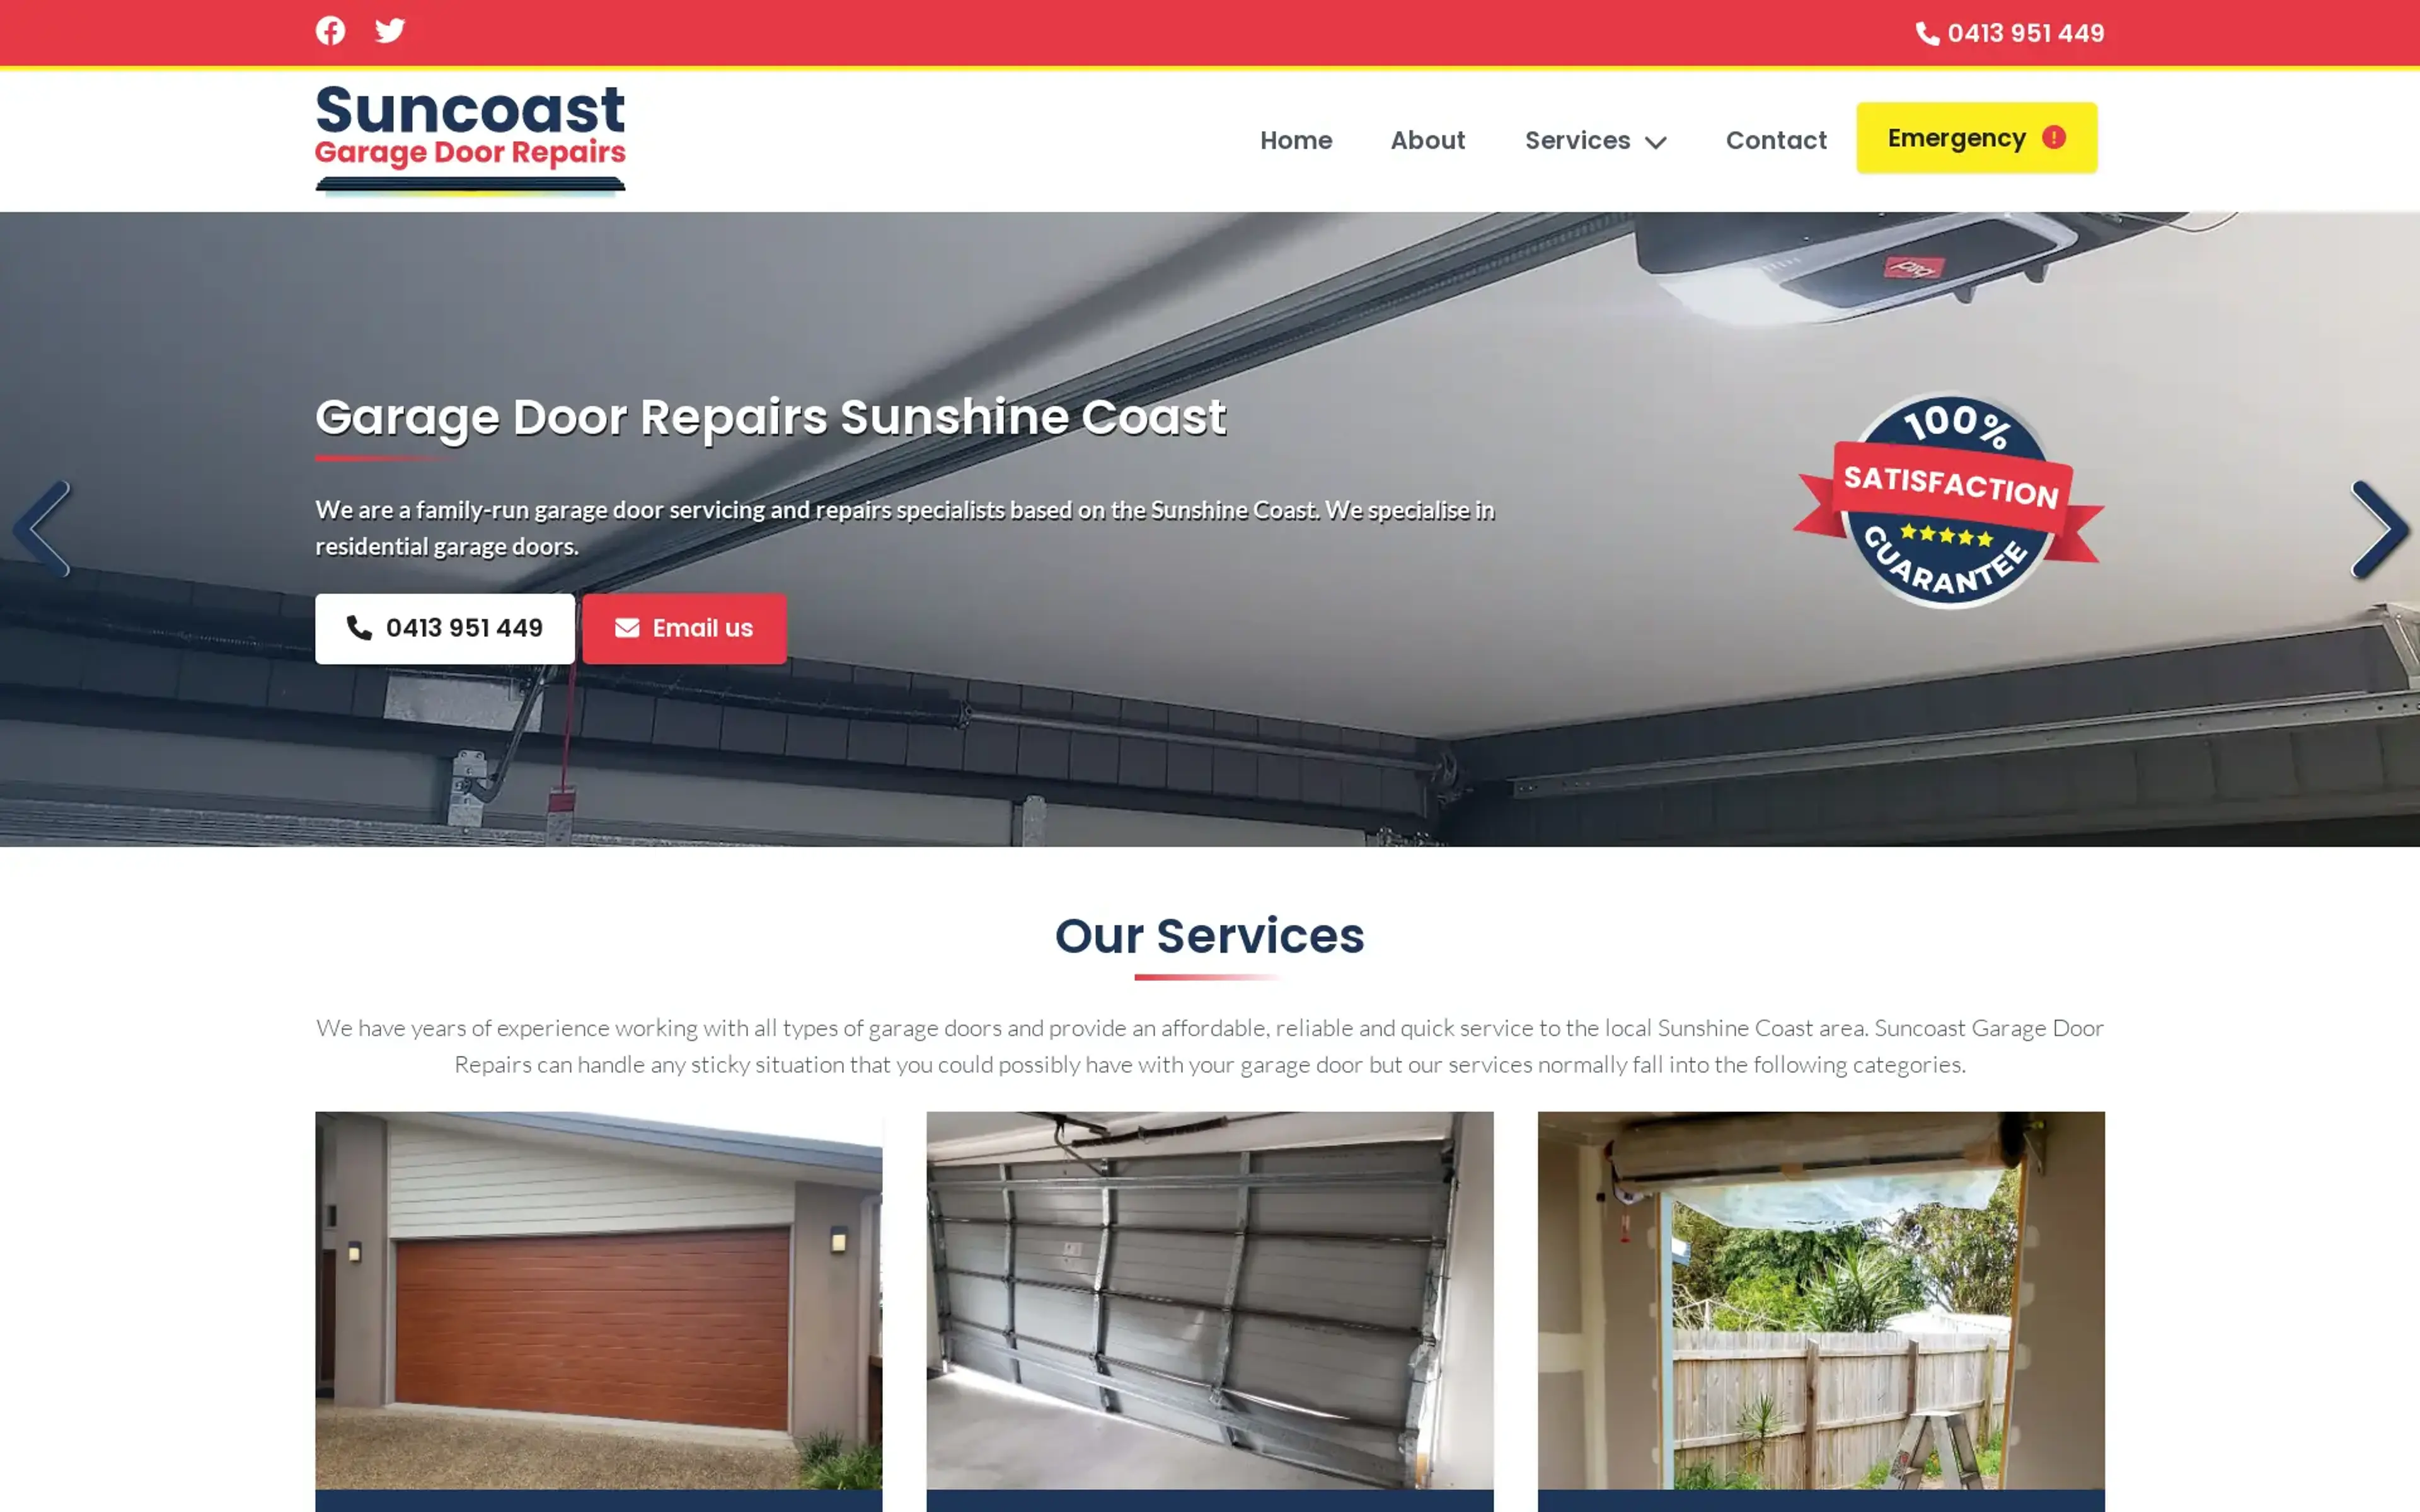 Recent project we worked on for Suncoast Garage Door Repairs